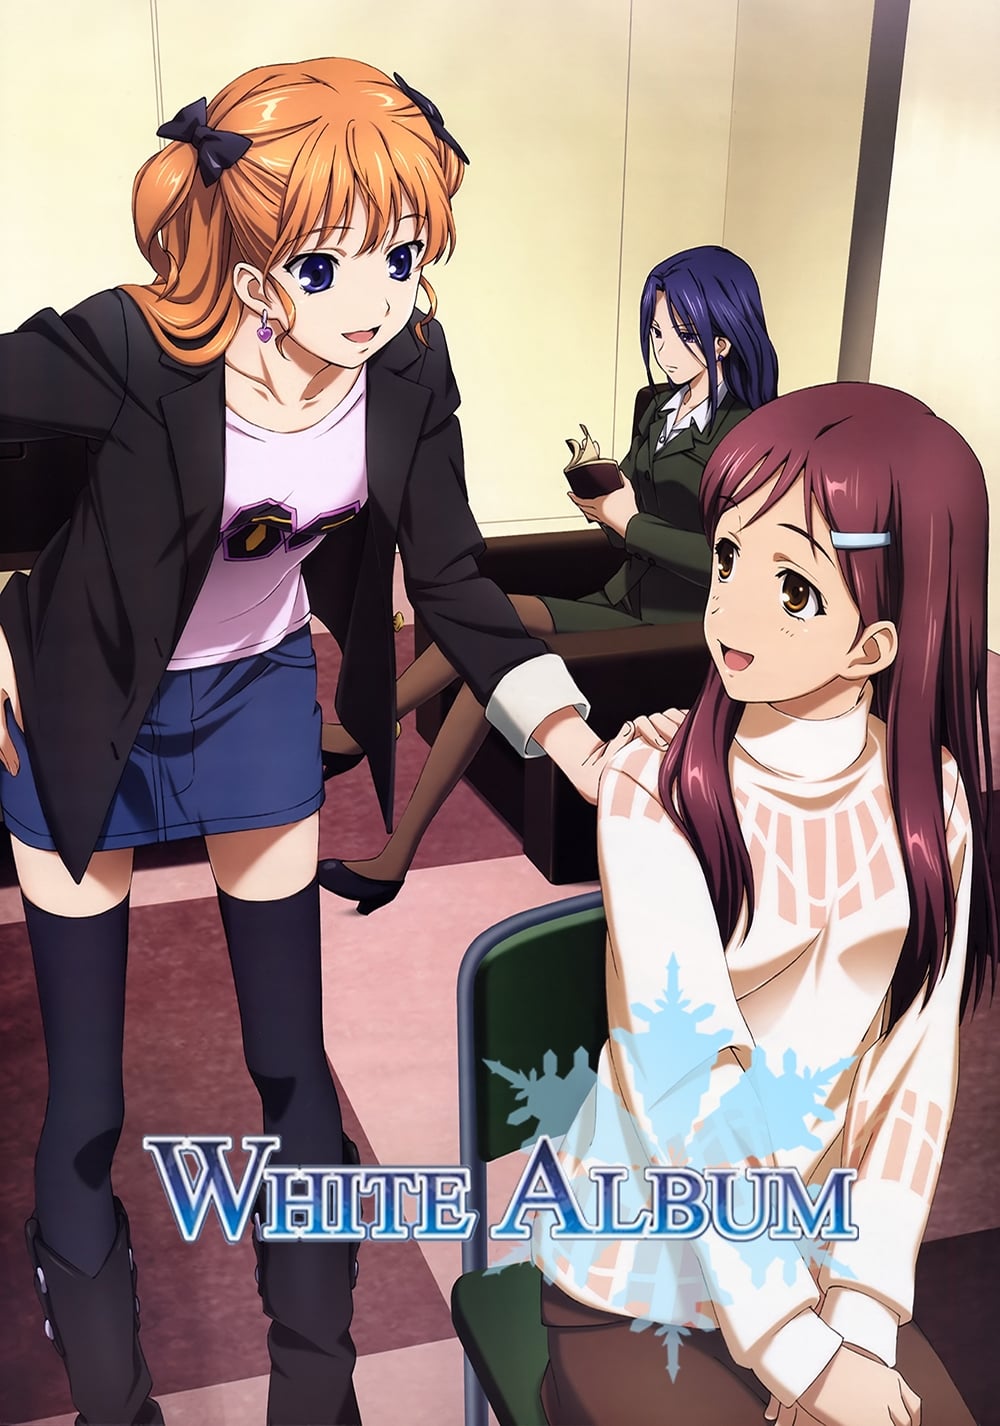 WHITE ALBUM TV Shows About Music Industry